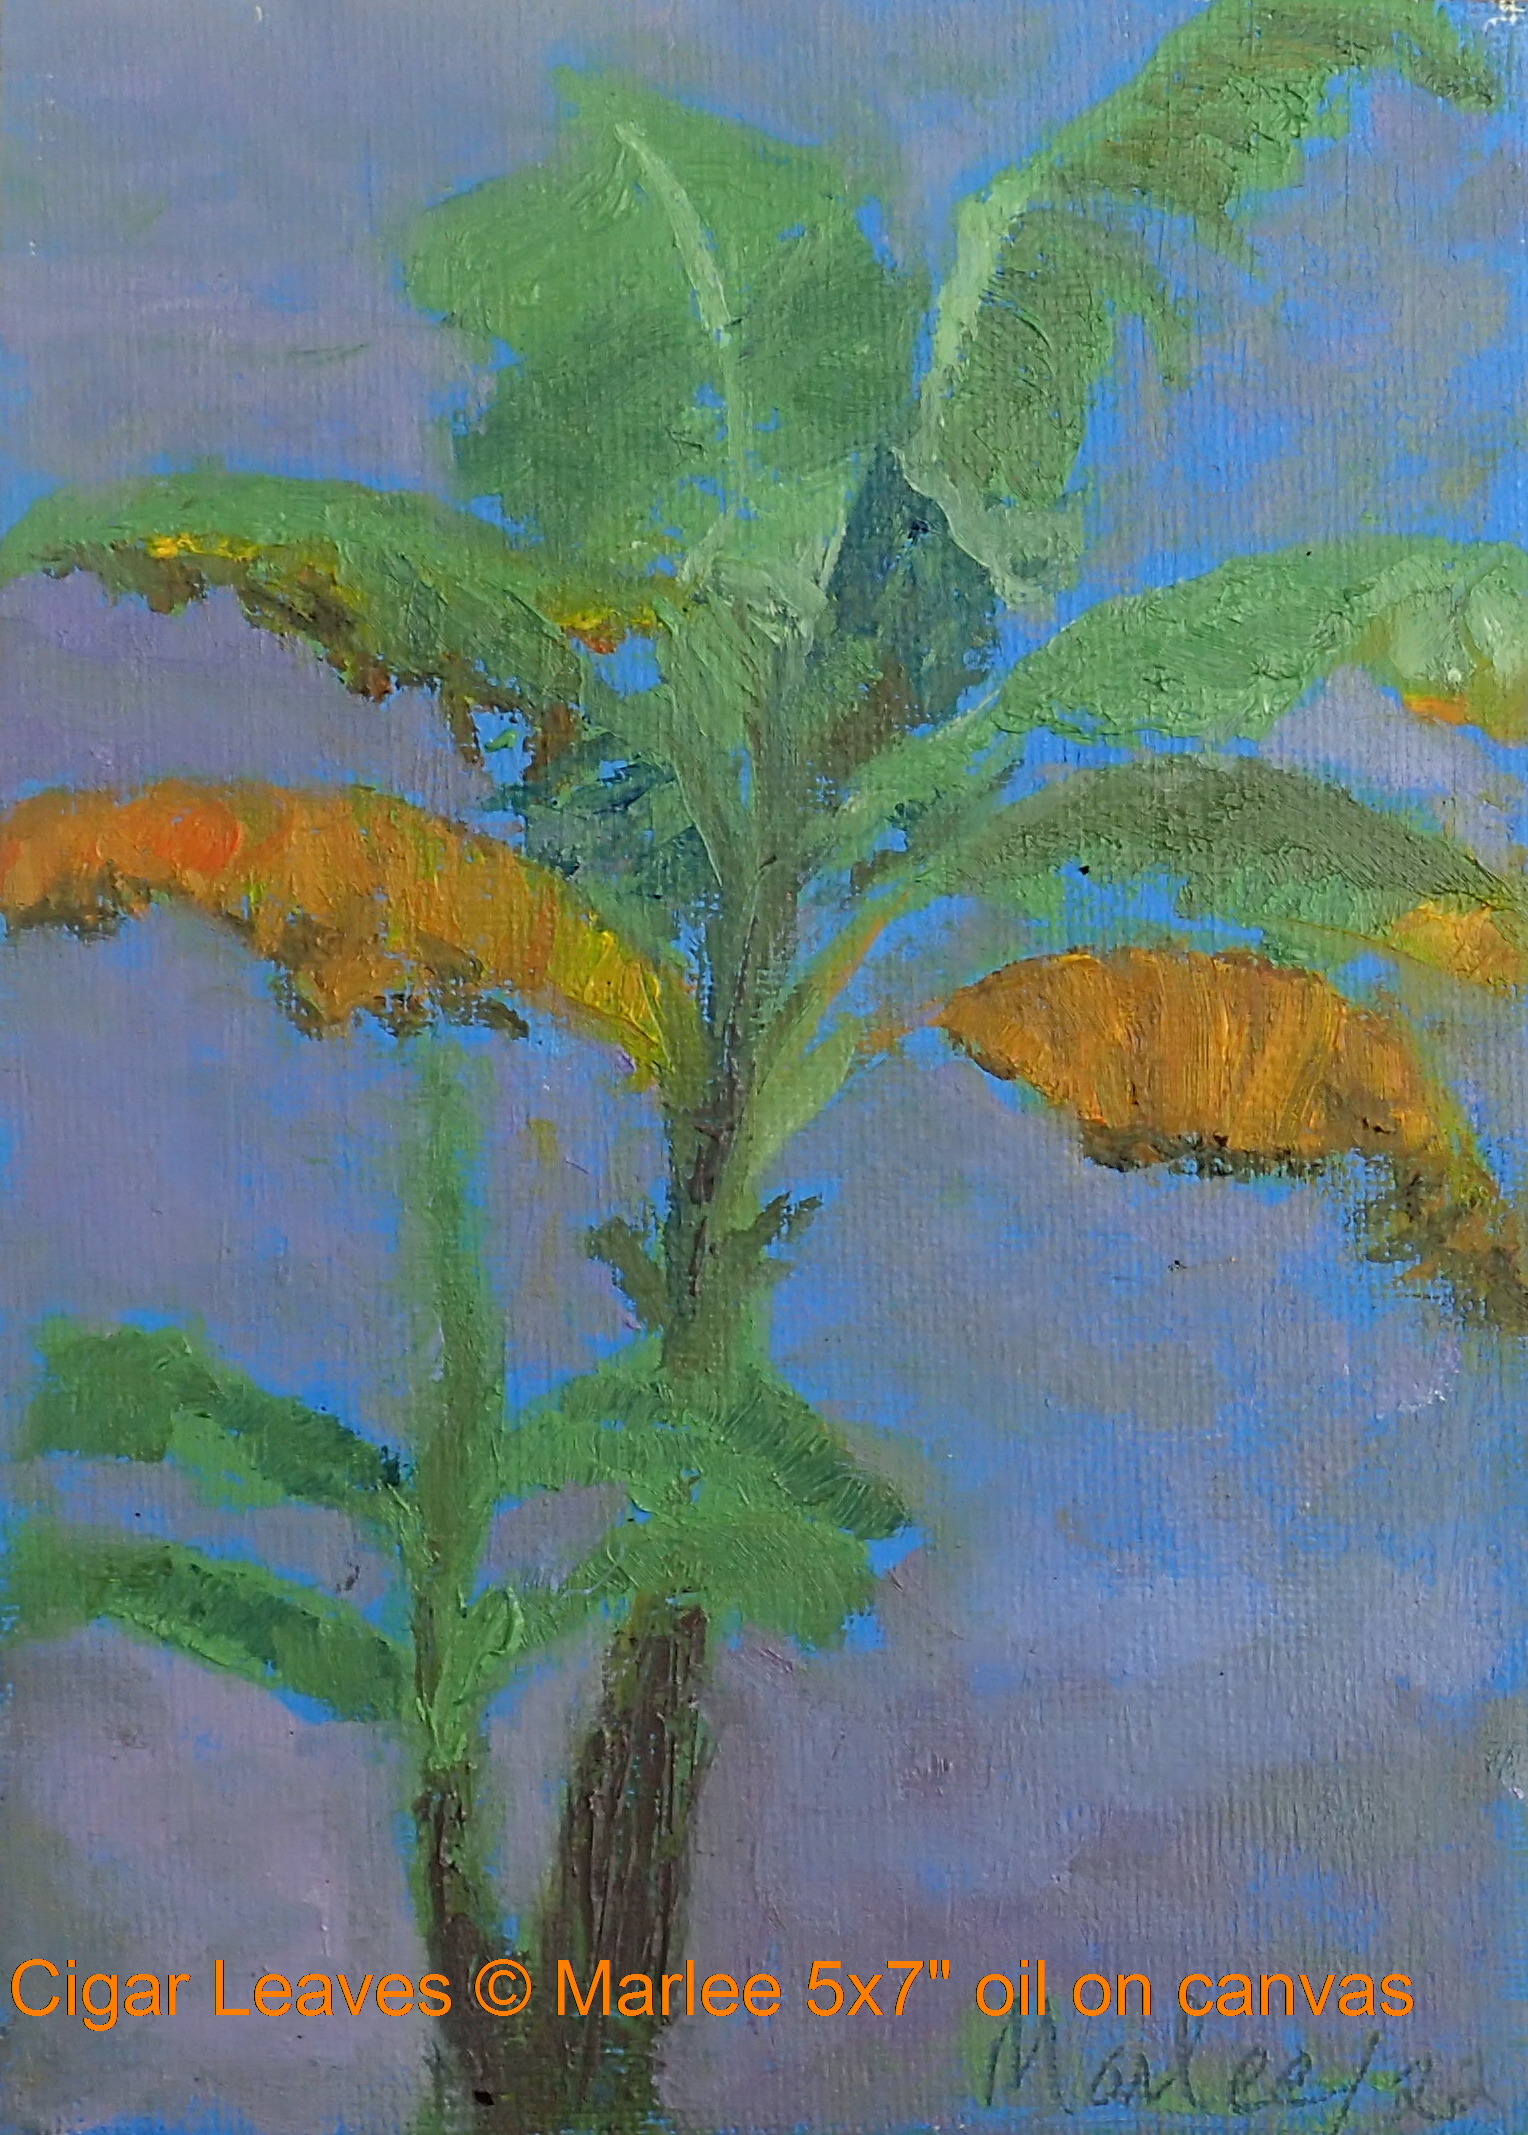 Canvas over wood 5x7 inch oil painting of the banana plant after weathering the storms of winter. 